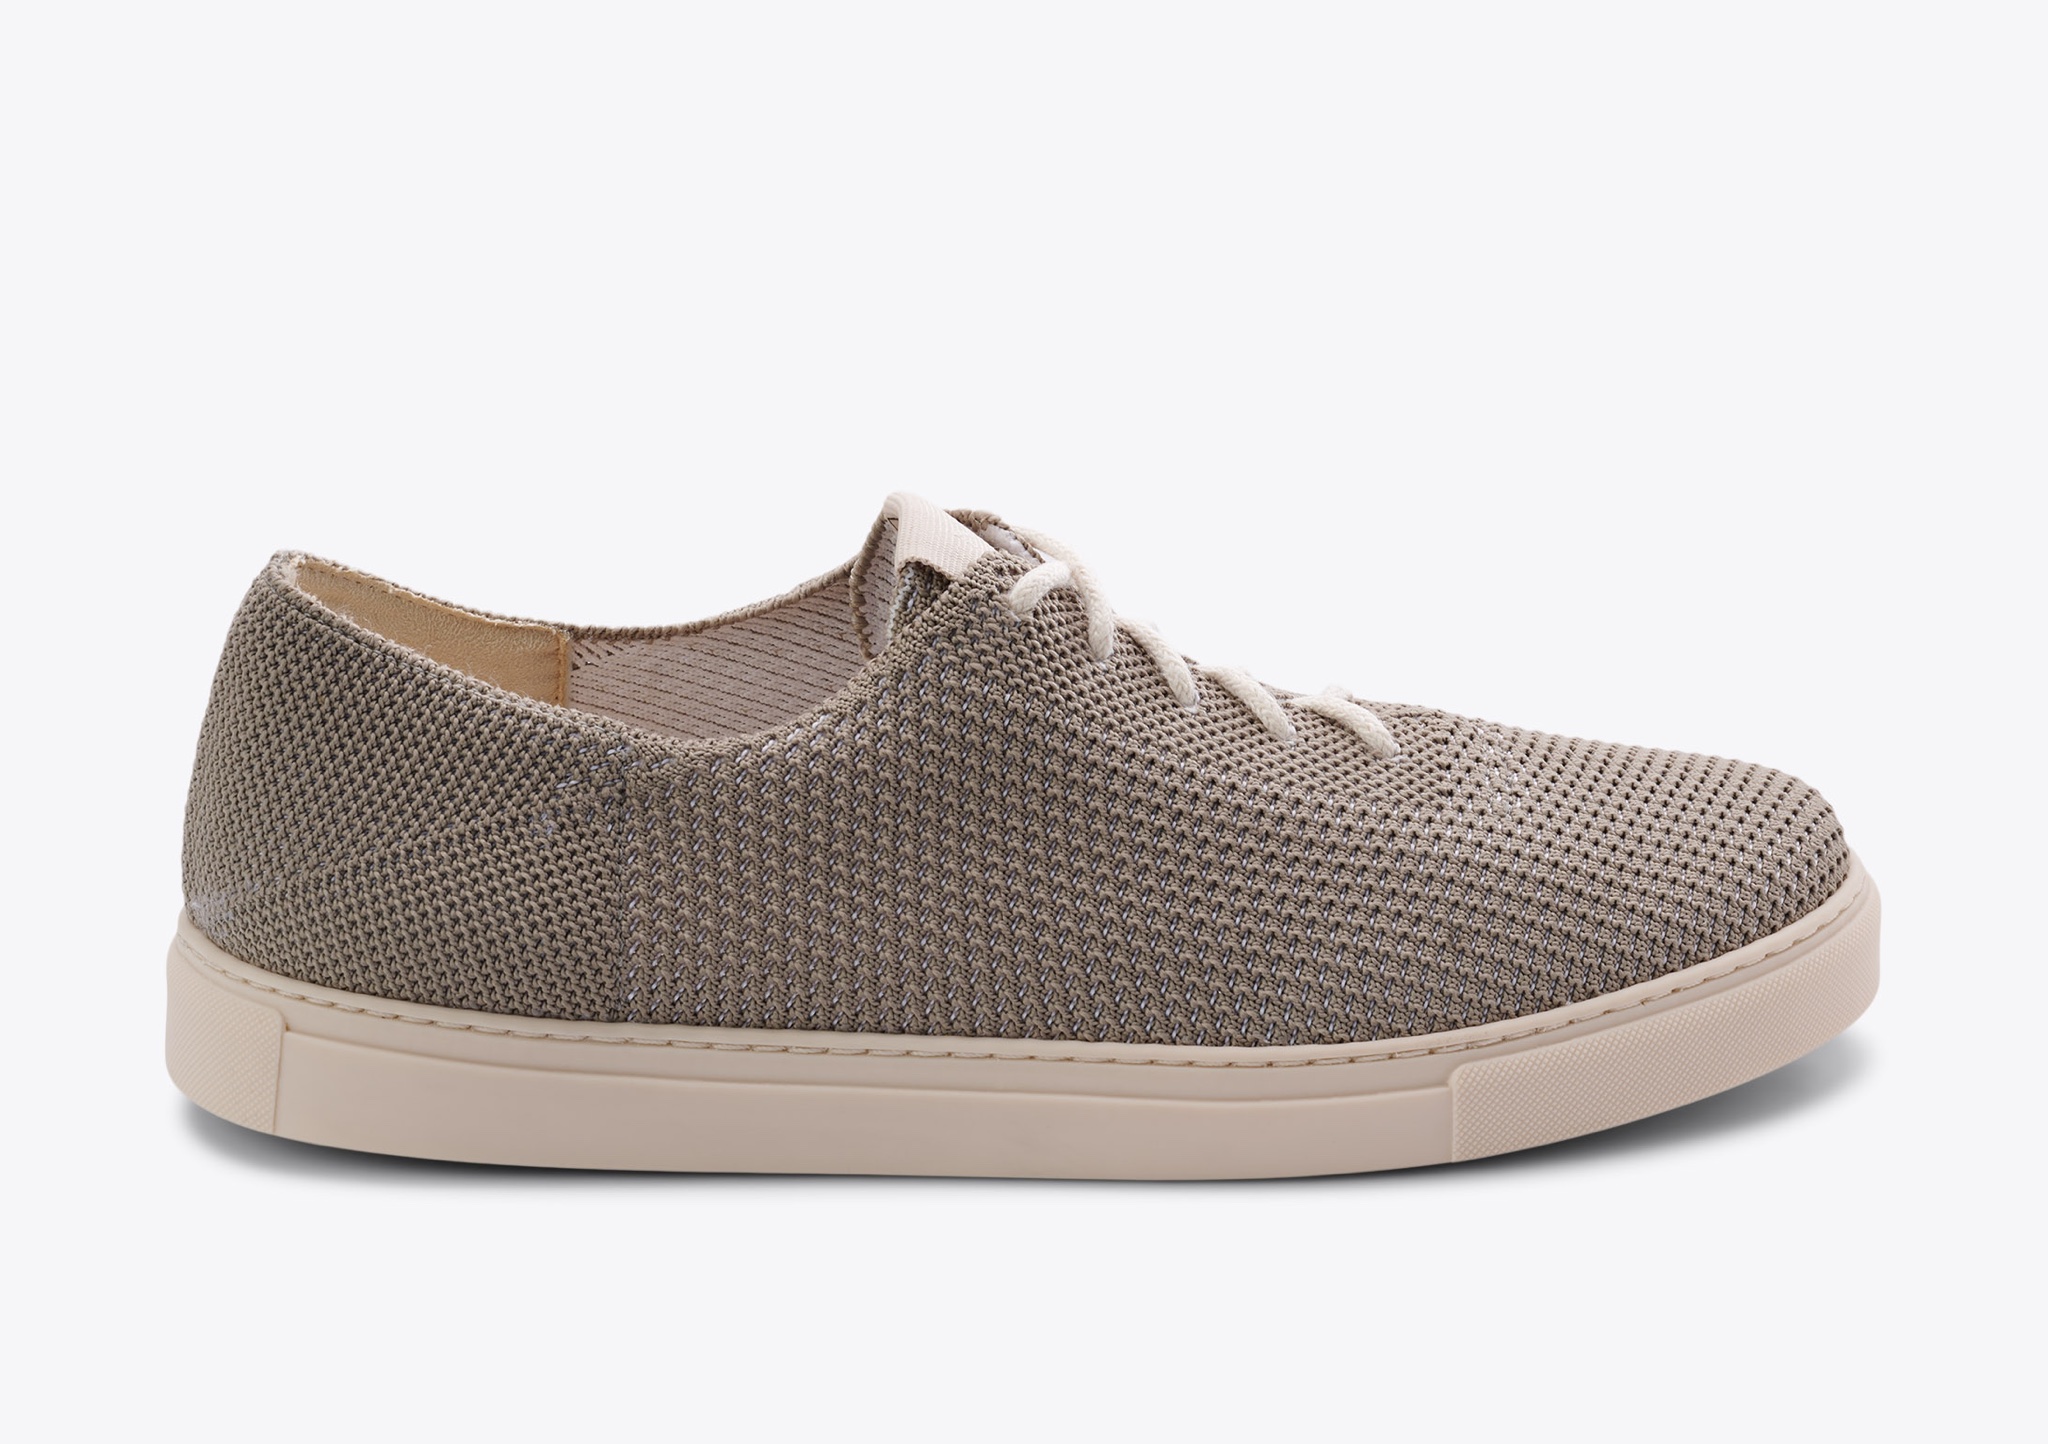 Nisolo Men's 365 Eco-Knit Sneaker Grey - Every Nisolo product is built on the foundation of comfort, function, and design. 